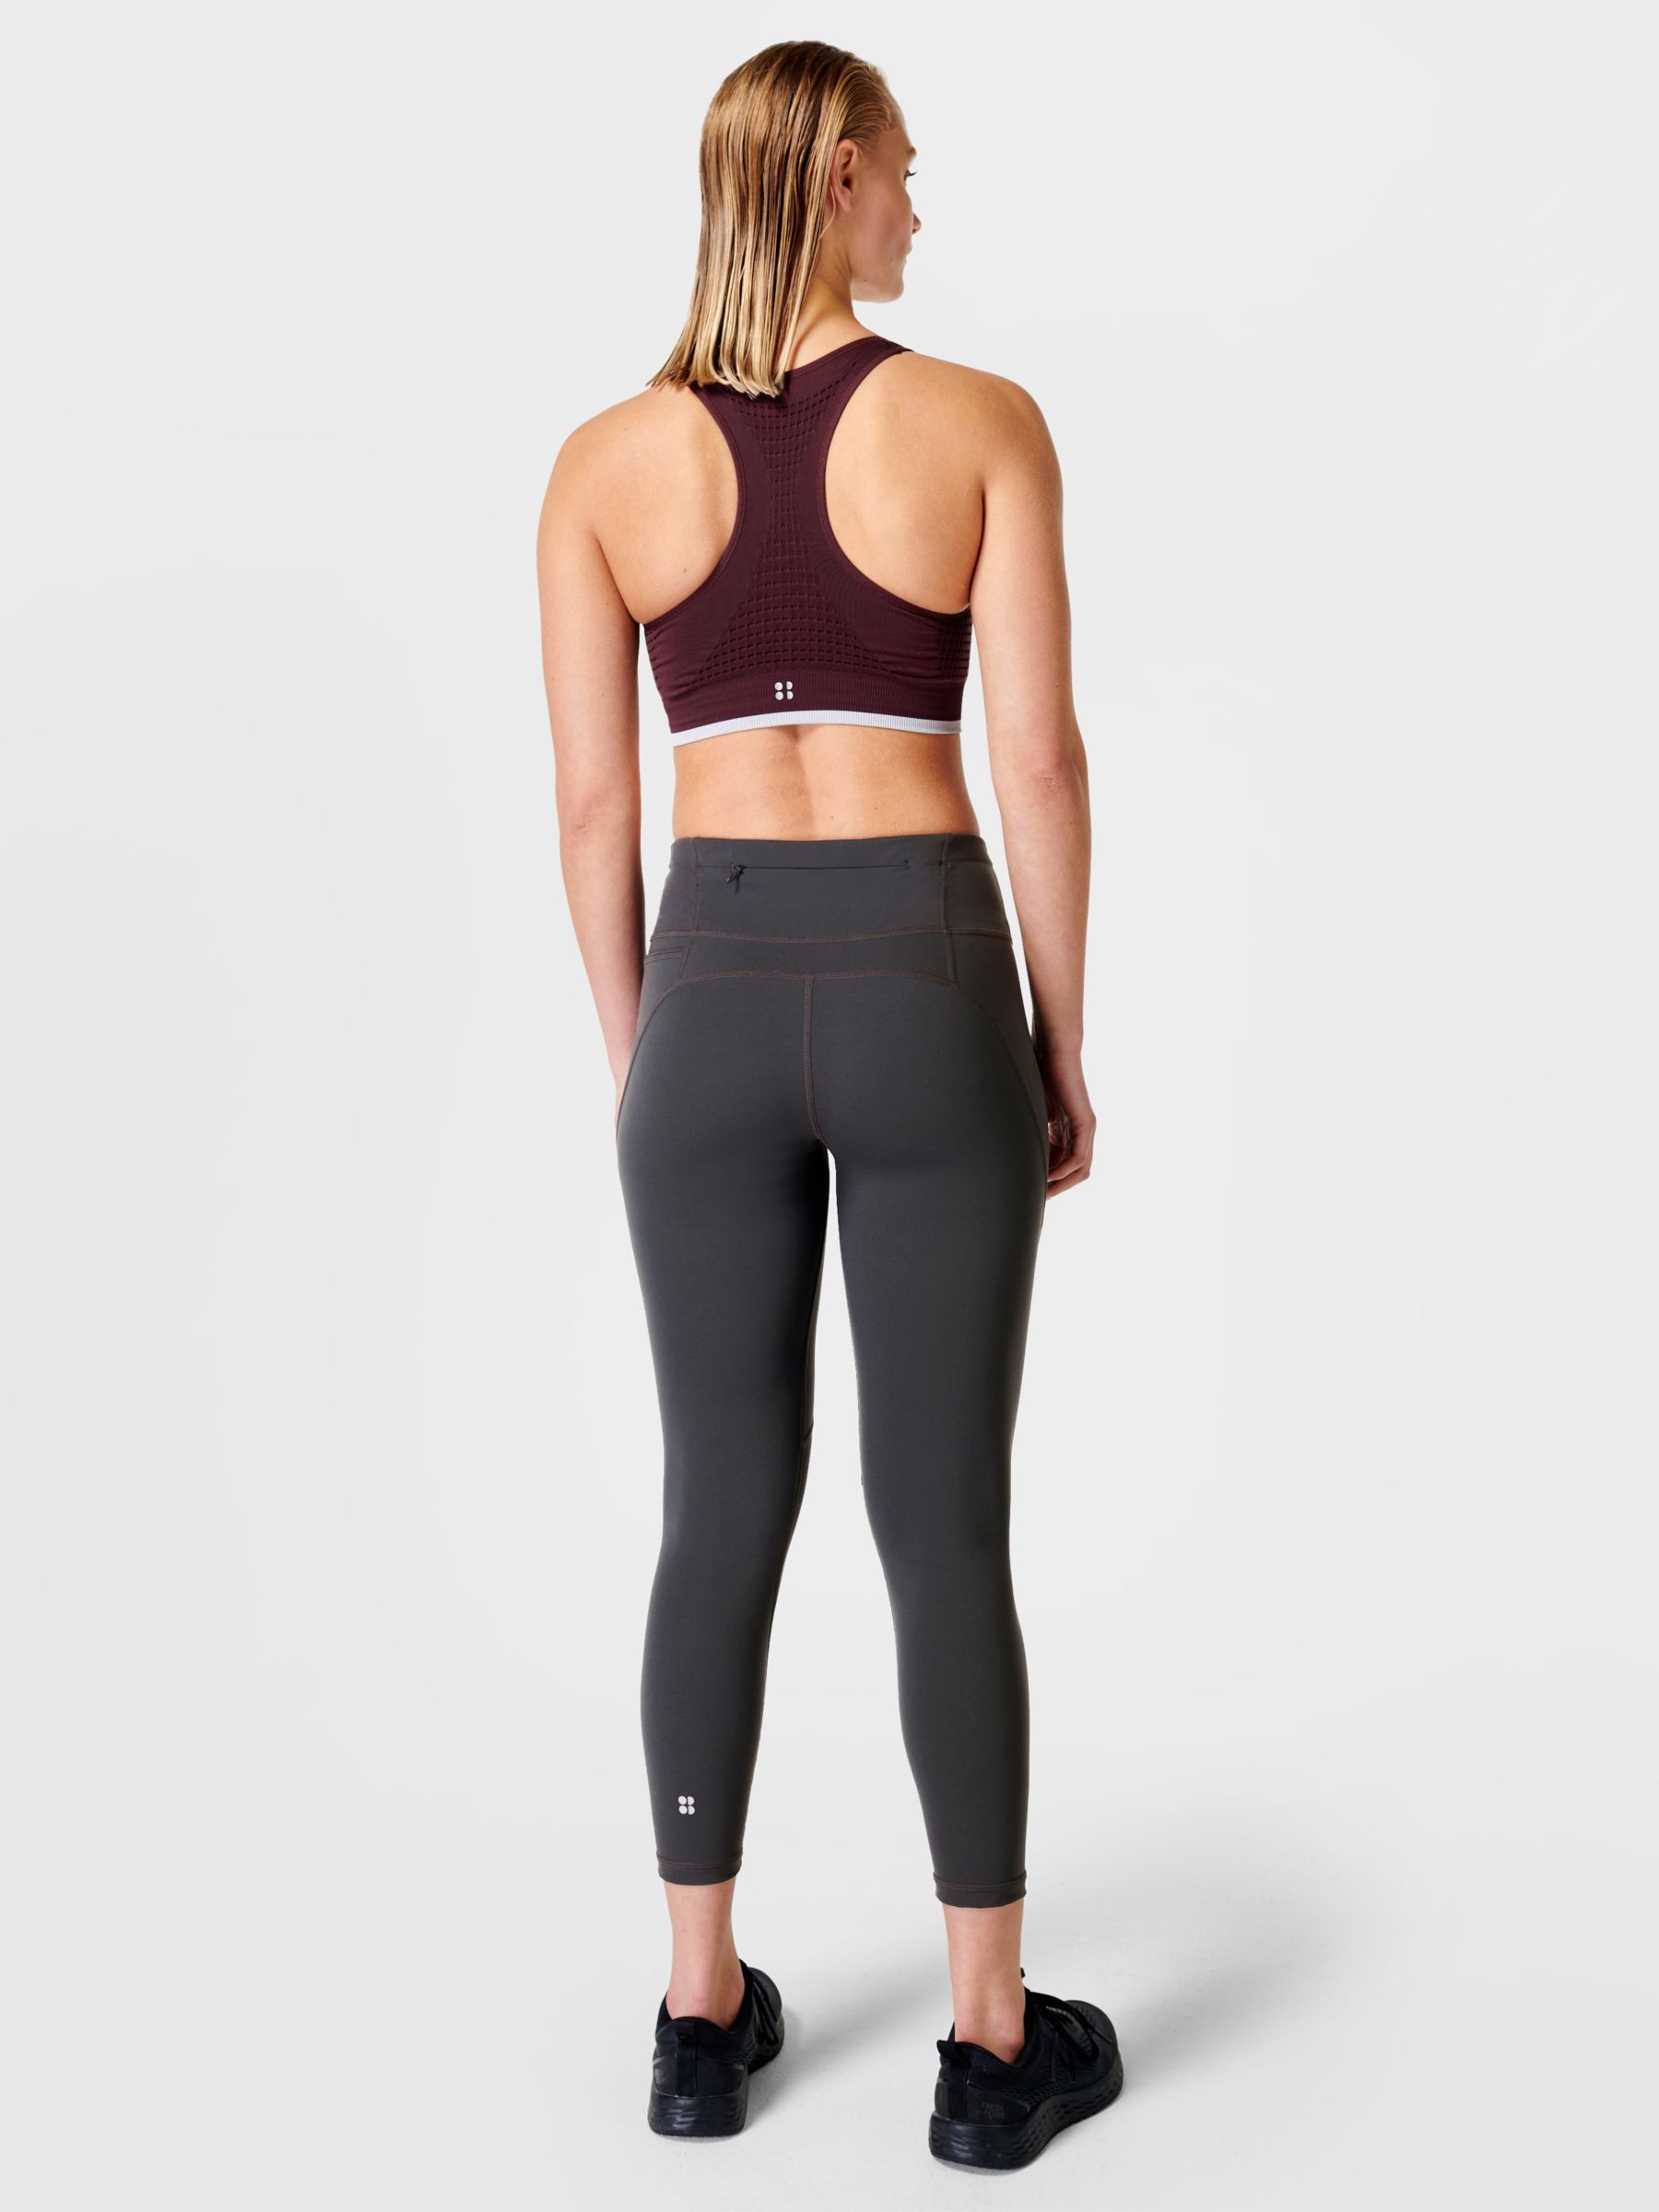 Sweaty Betty sale: Up to 70% off select workout gear